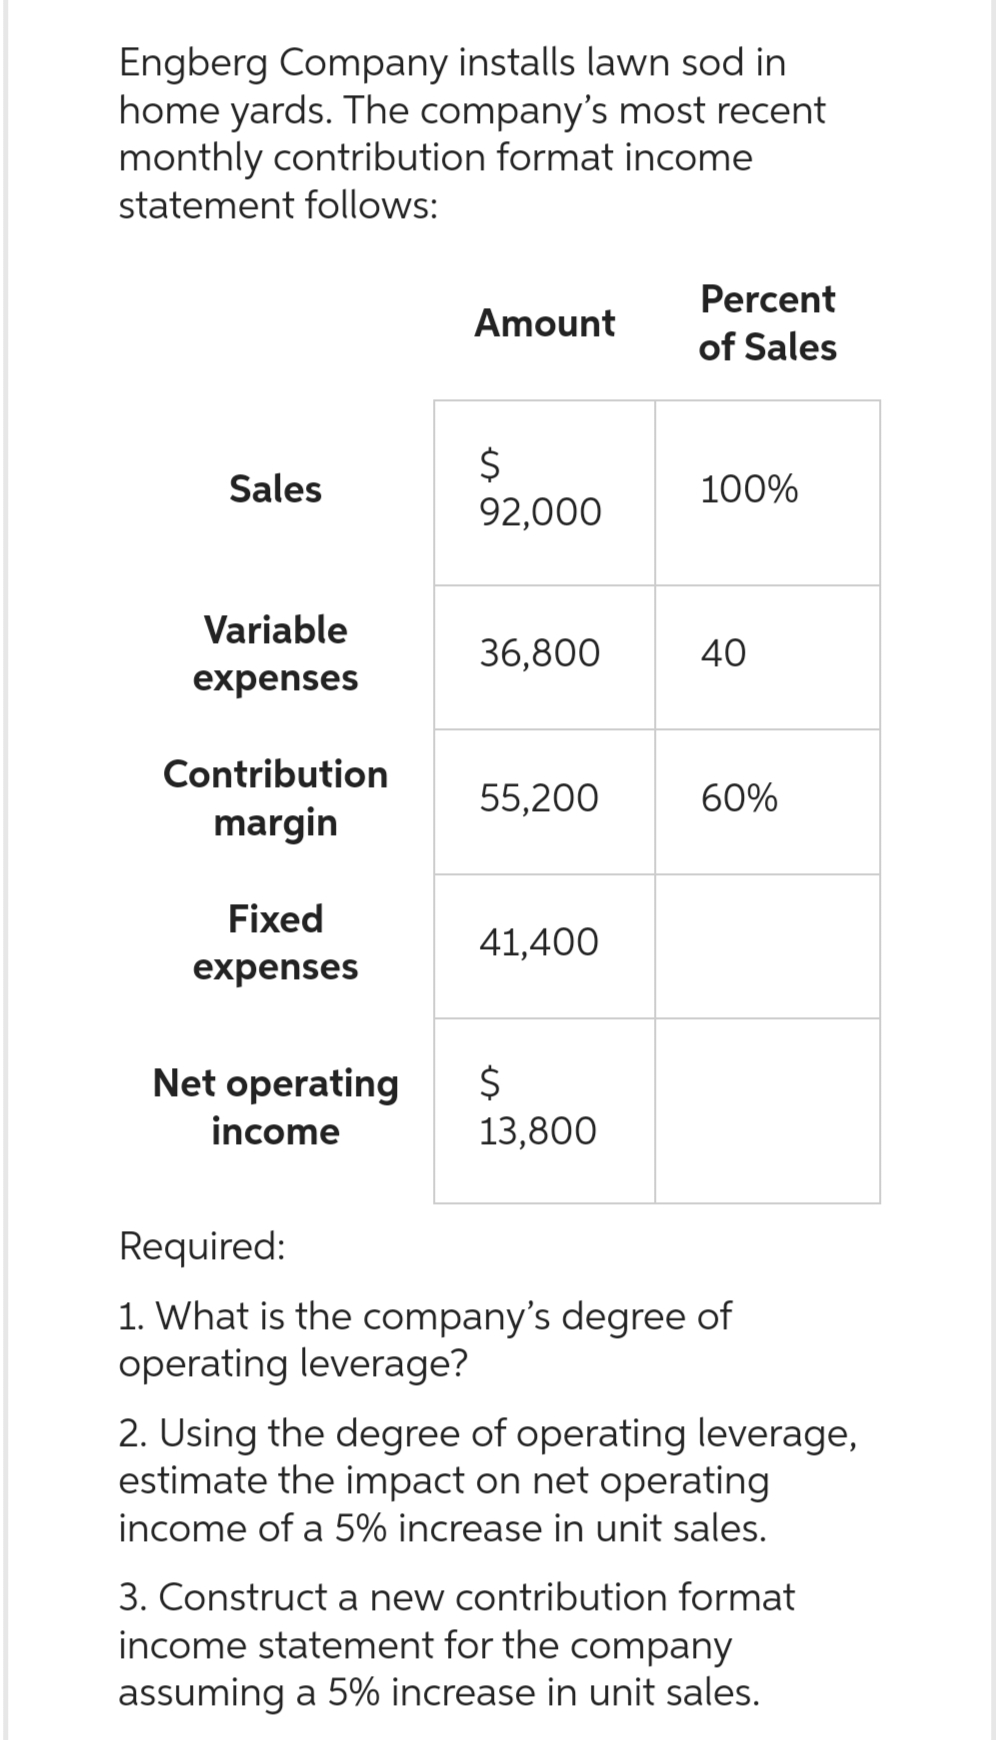 Engberg Company installs lawn sod in
home yards. The company's most recent
monthly contribution format income
statement follows:
Sales
Variable
expenses
Contribution
margin
Fixed
expenses
Net operating
income
Amount
$
92,000
36,800
55,200
41,400
$
13,800
Percent
of Sales
100%
40
60%
Required:
1. What is the company's degree of
operating leverage?
2. Using the degree of operating leverage,
estimate the impact on net operating
income of a 5% increase in unit sales.
3. Construct a new contribution format
income statement for the company
assuming a 5% increase in unit sales.